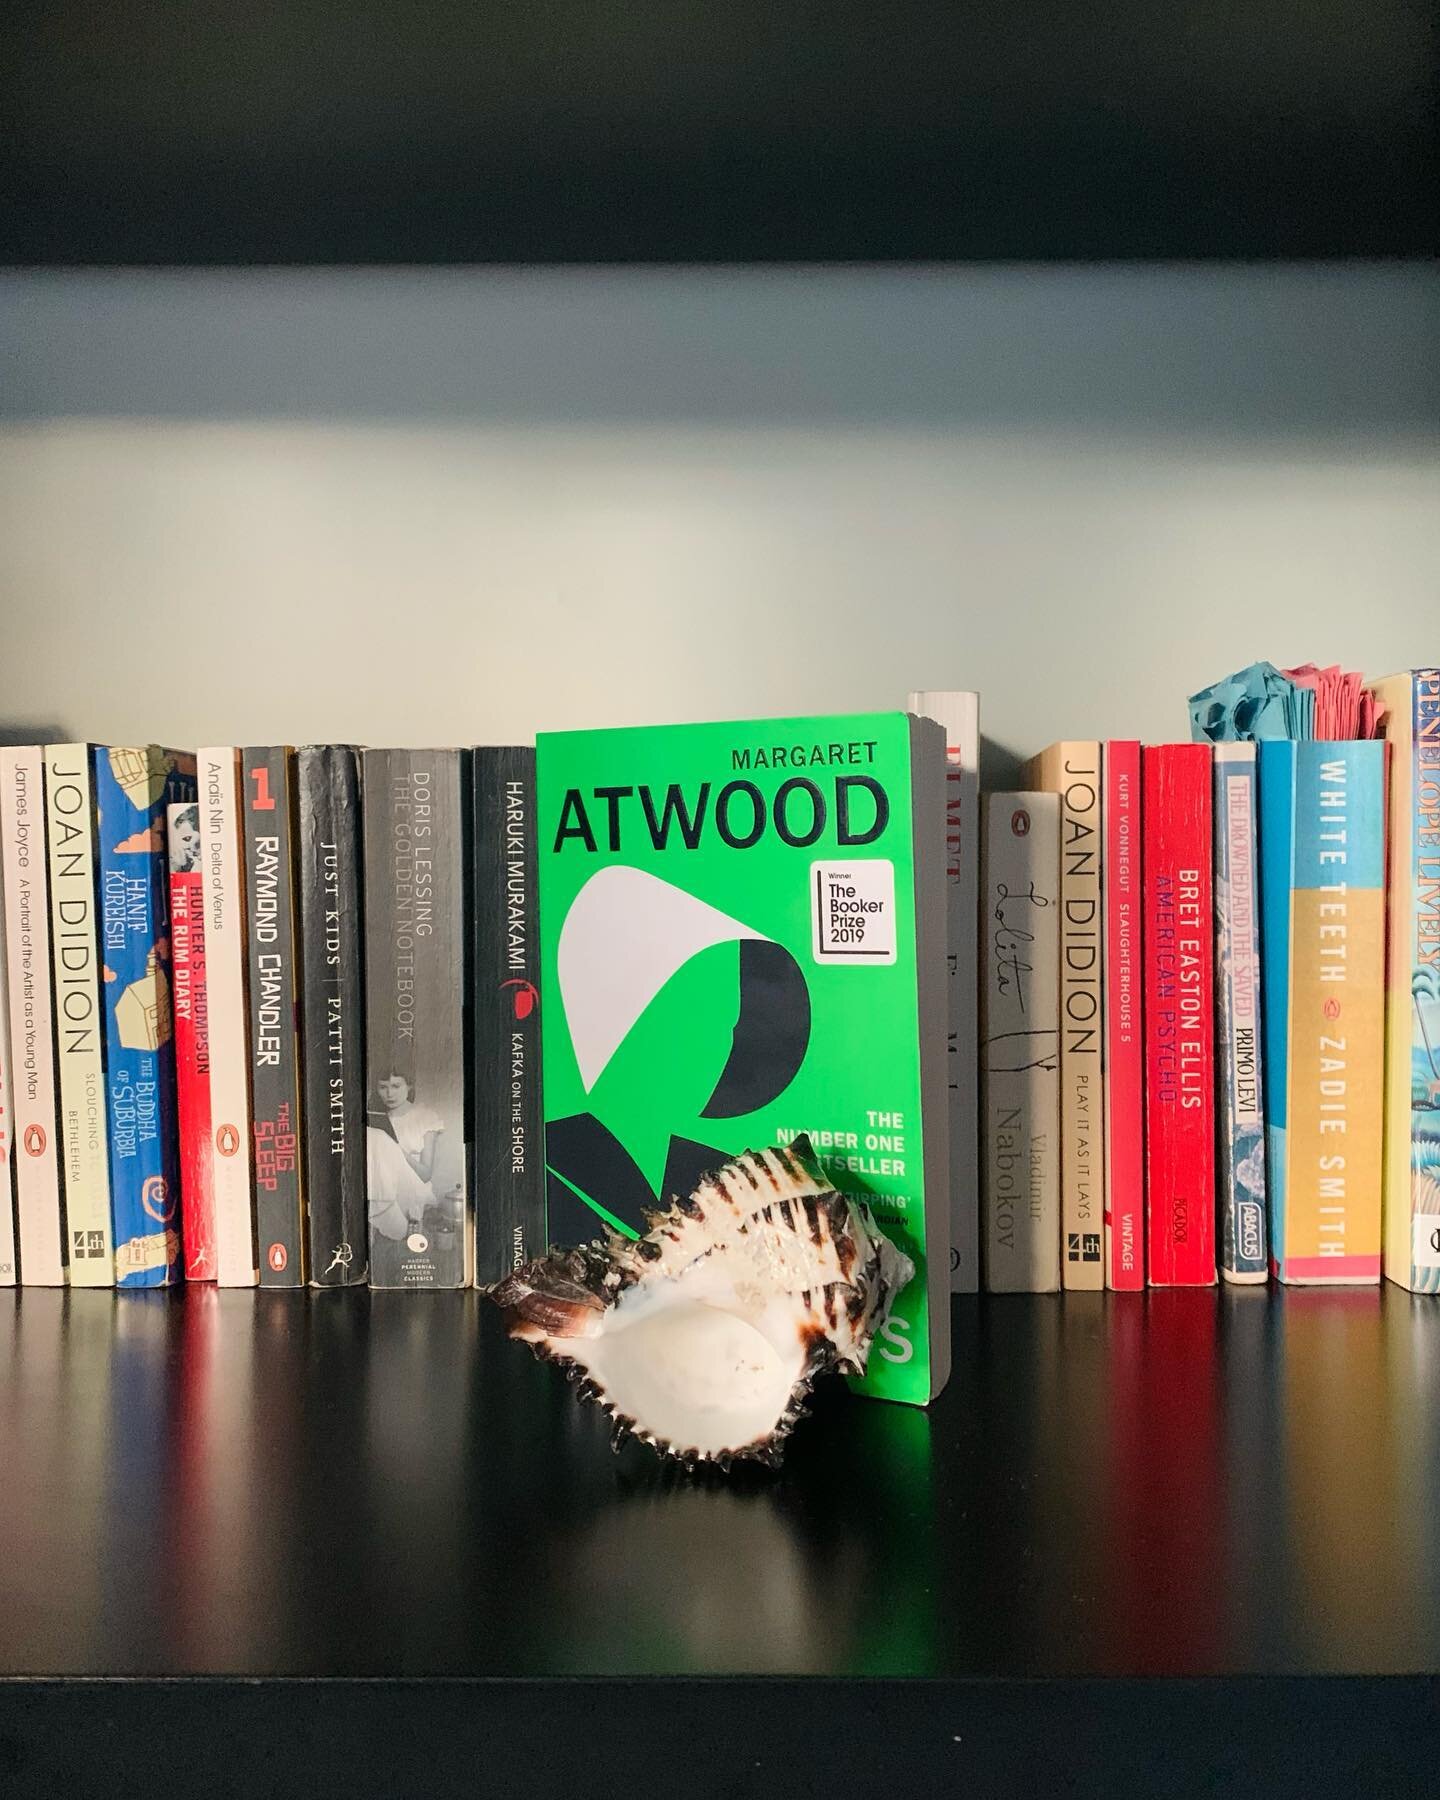 Margaret Atwood needs no introduction. In The Testaments she brilliantly weaves horror, adventure, comedy and hope. I enjoyed it even more than The Handmaid&rsquo;s Tale, even though it left me with a lingering, unsettling feeling that dystopia might